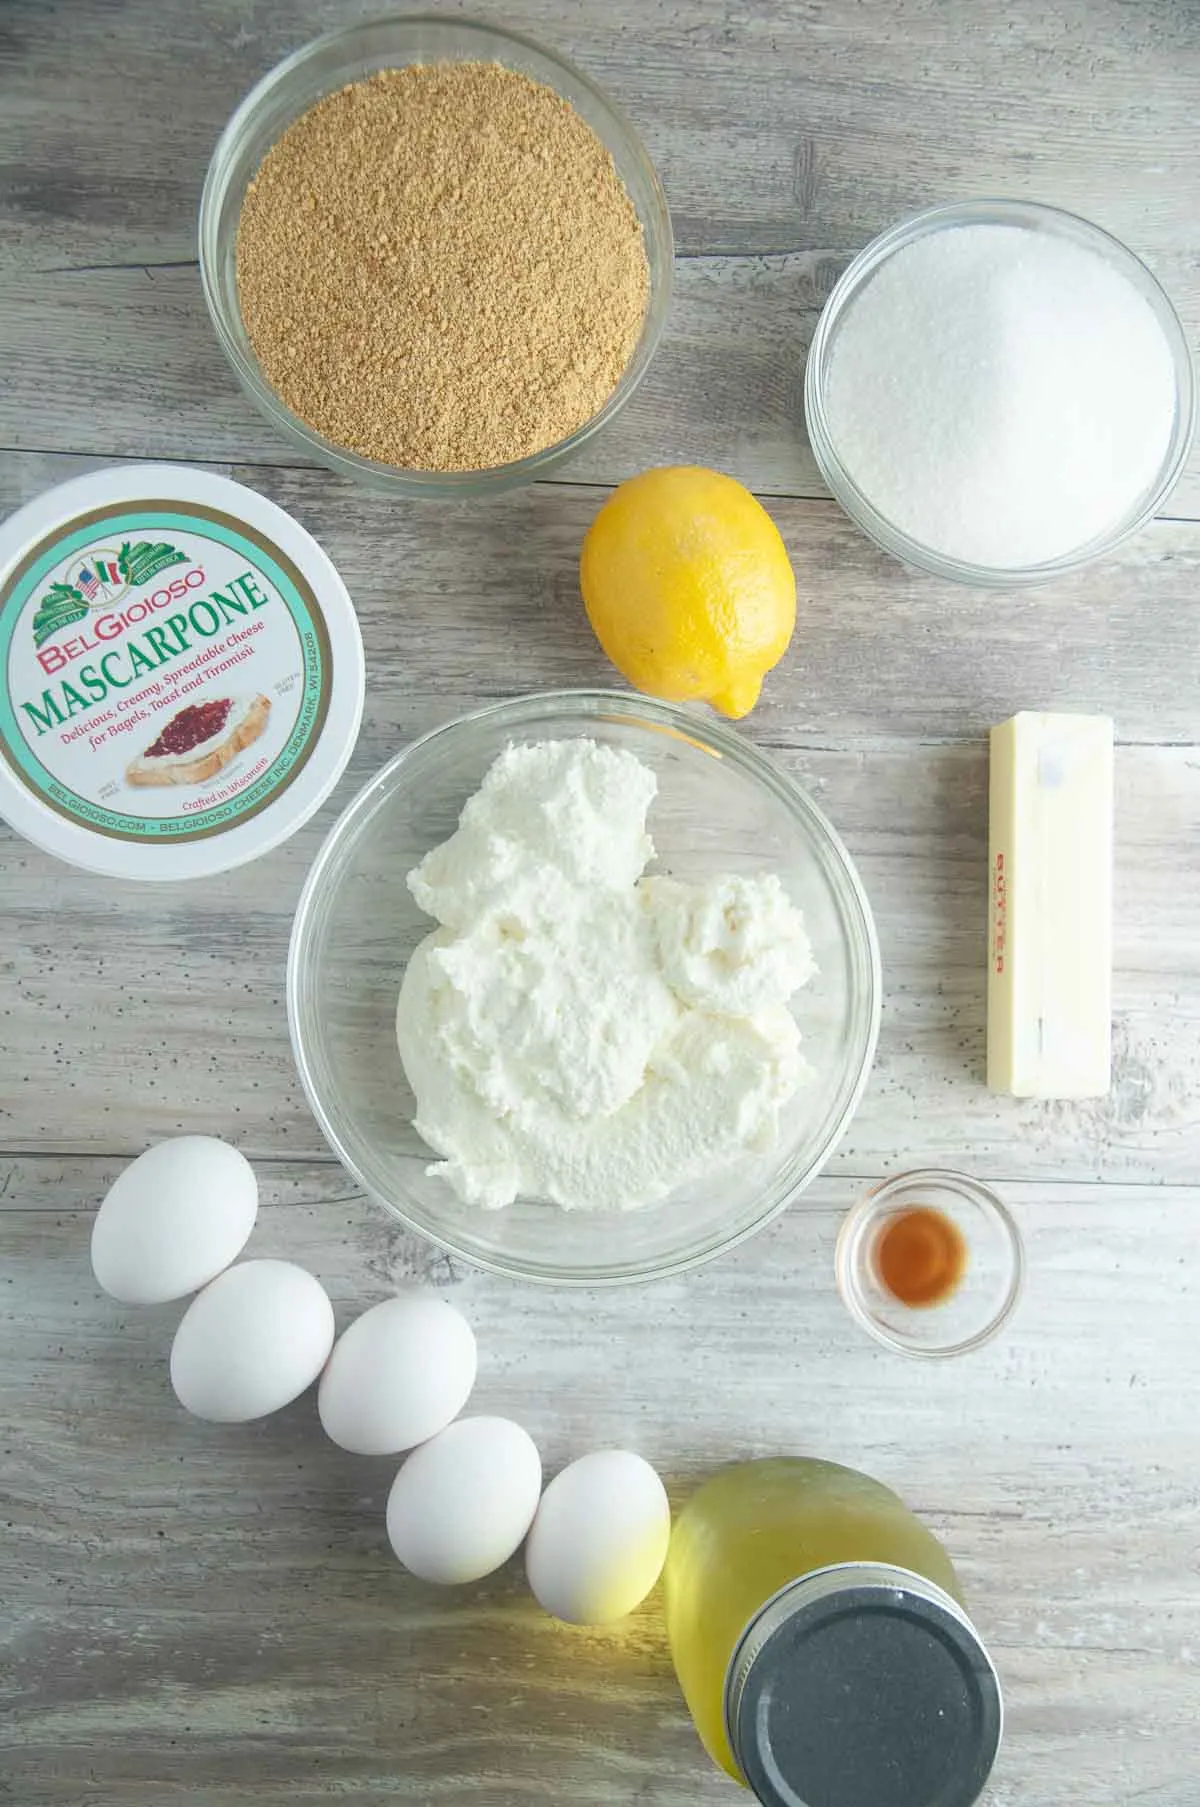 Ingredients for Limoncello Cheesecake: Graham Cracker Crumbs, Sugar, Mascarpone Cheese, Ricotta Cheese, Butter, Vanilla, Eggs, Limoncollo, and Lemon Zest